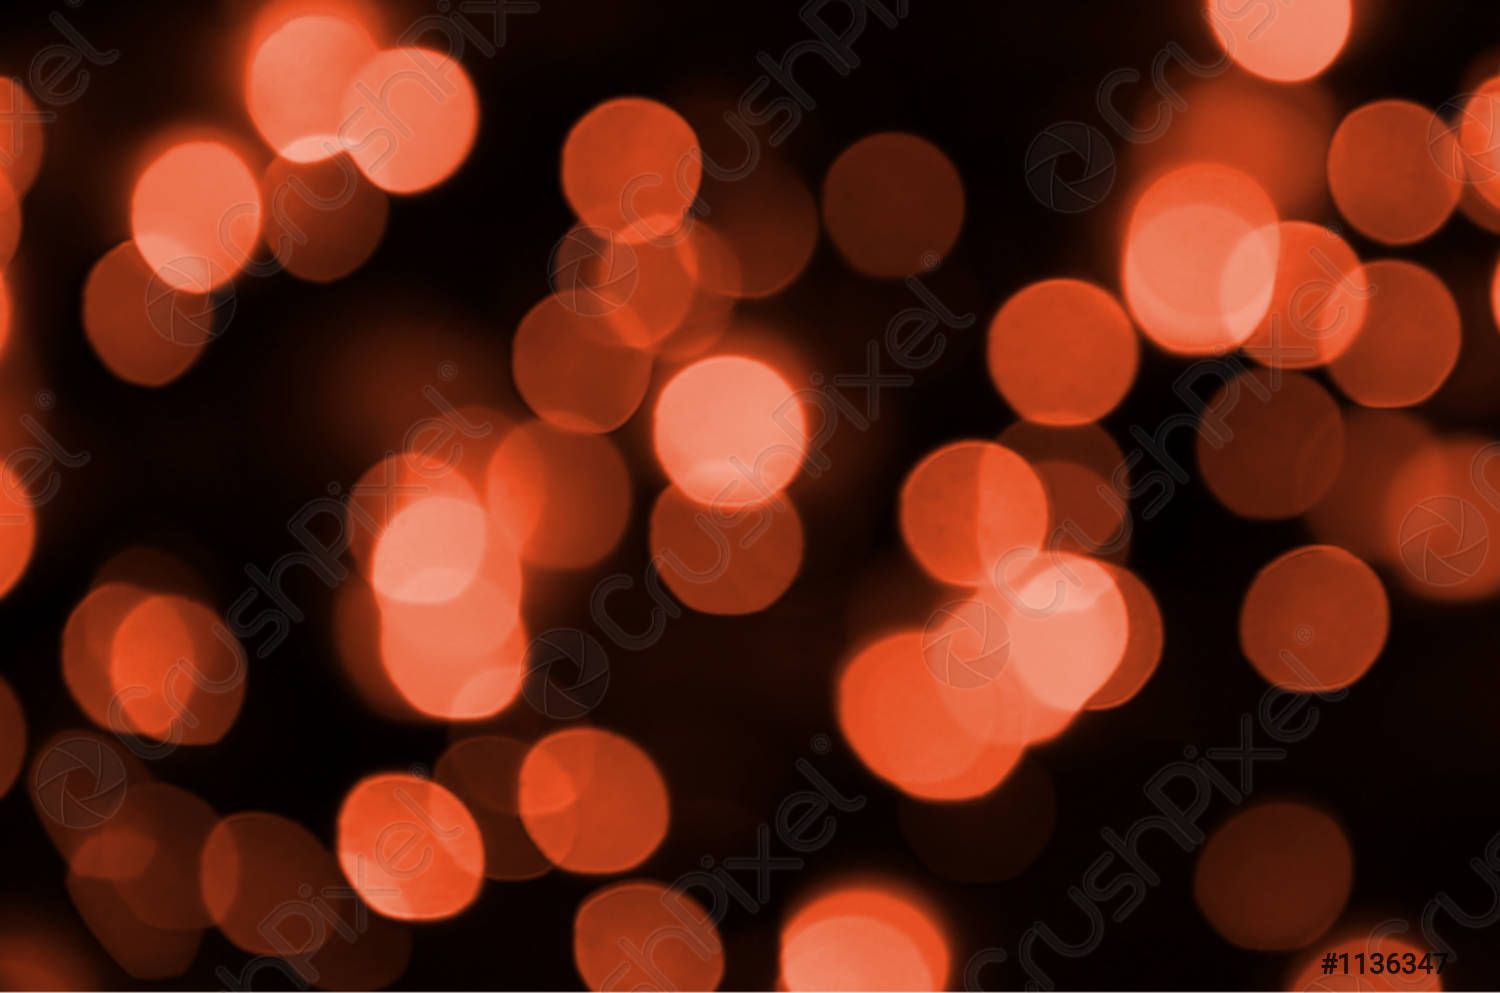 Abstract Blurred Of Red Glittering Shine Bulbs Lights Background Blur